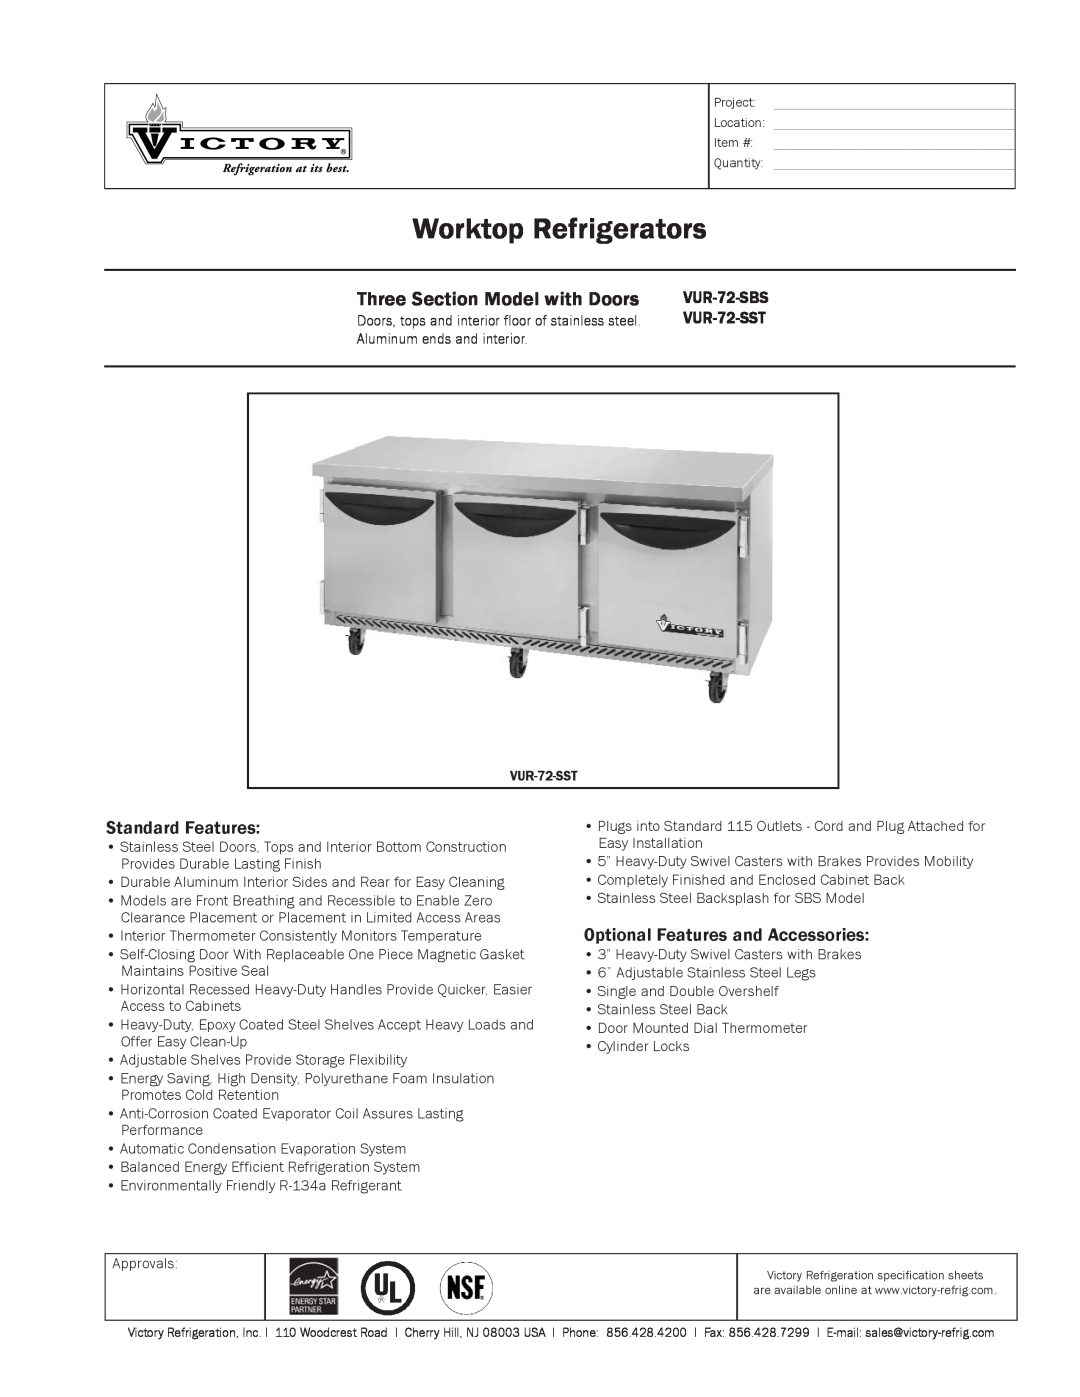 Victory Refrigeration VUR-72-SBS specifications Three Section Model with Doors, Standard Features, Worktop Refrigerators 